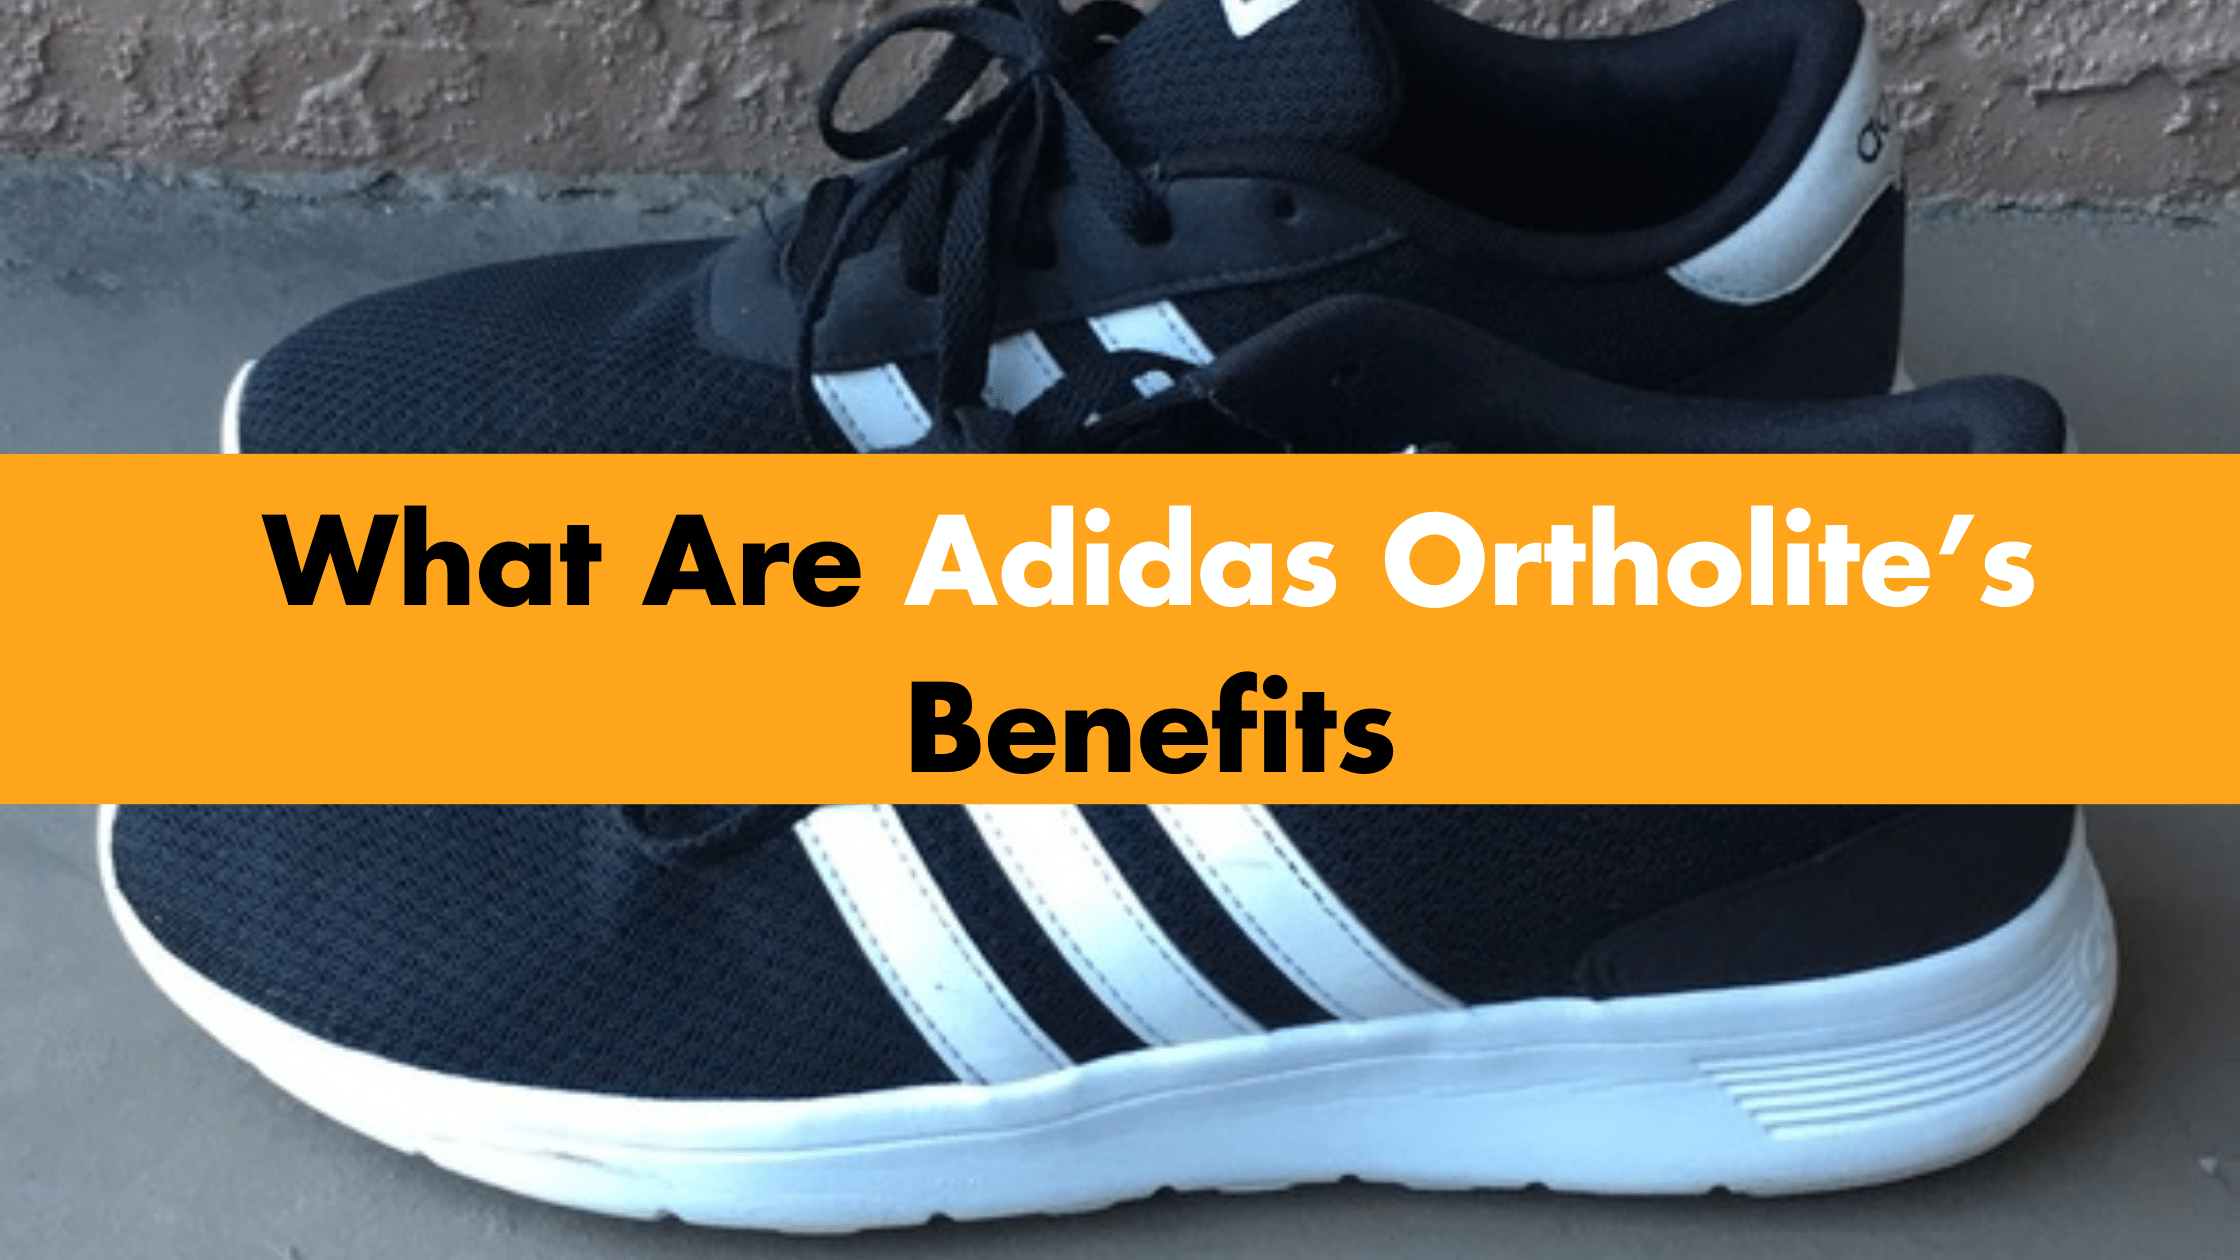 What Are Adidas Ortholite’s Benefits?